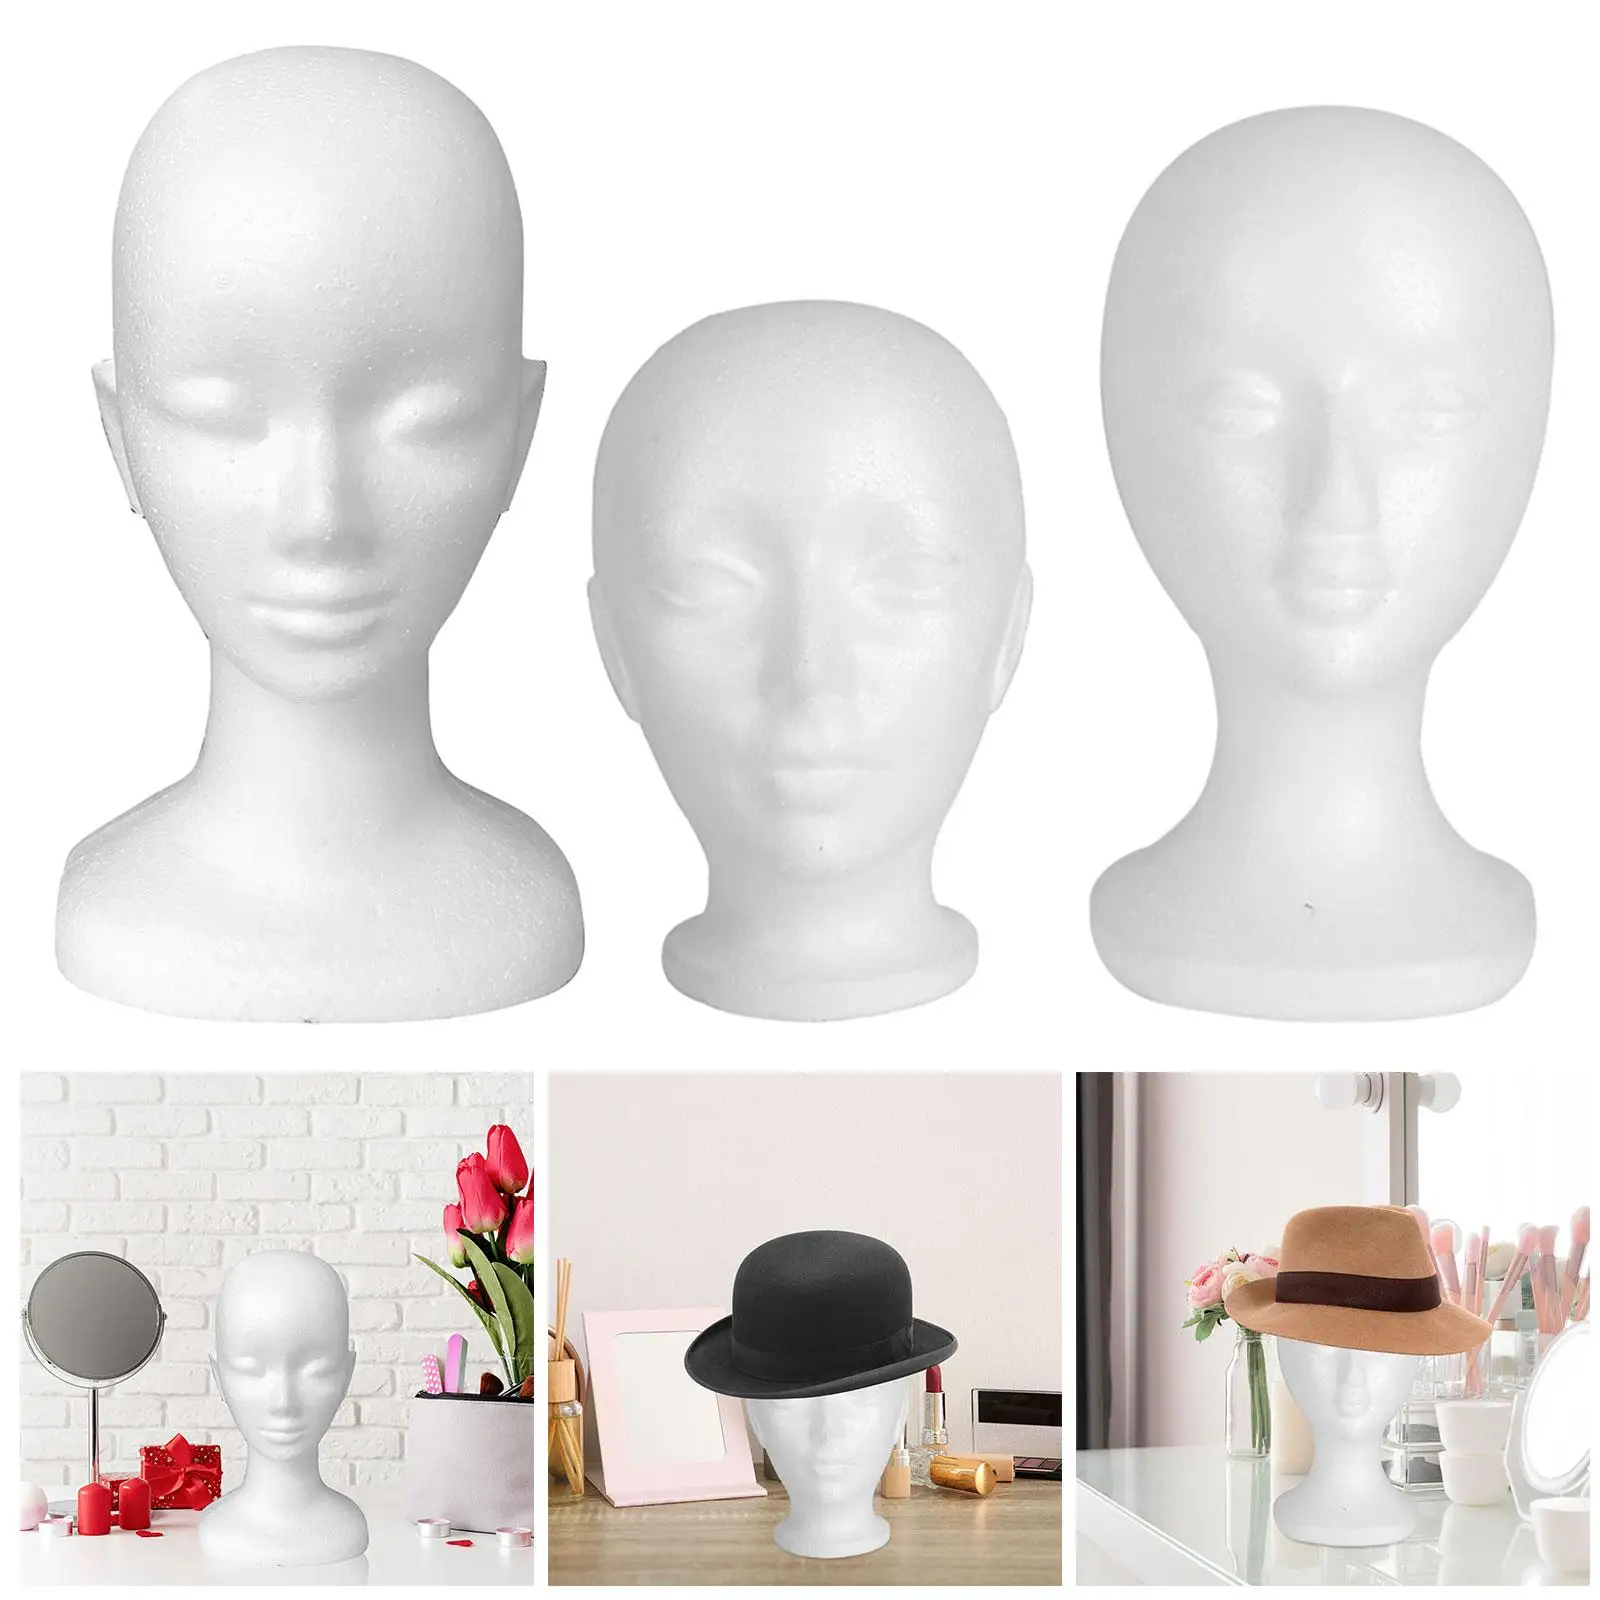 Mannequin Head Stand Model White Lightweight Stable Manikin Head Hair Glasses Hat Display for Hats Headset Home Sunglasses Salon